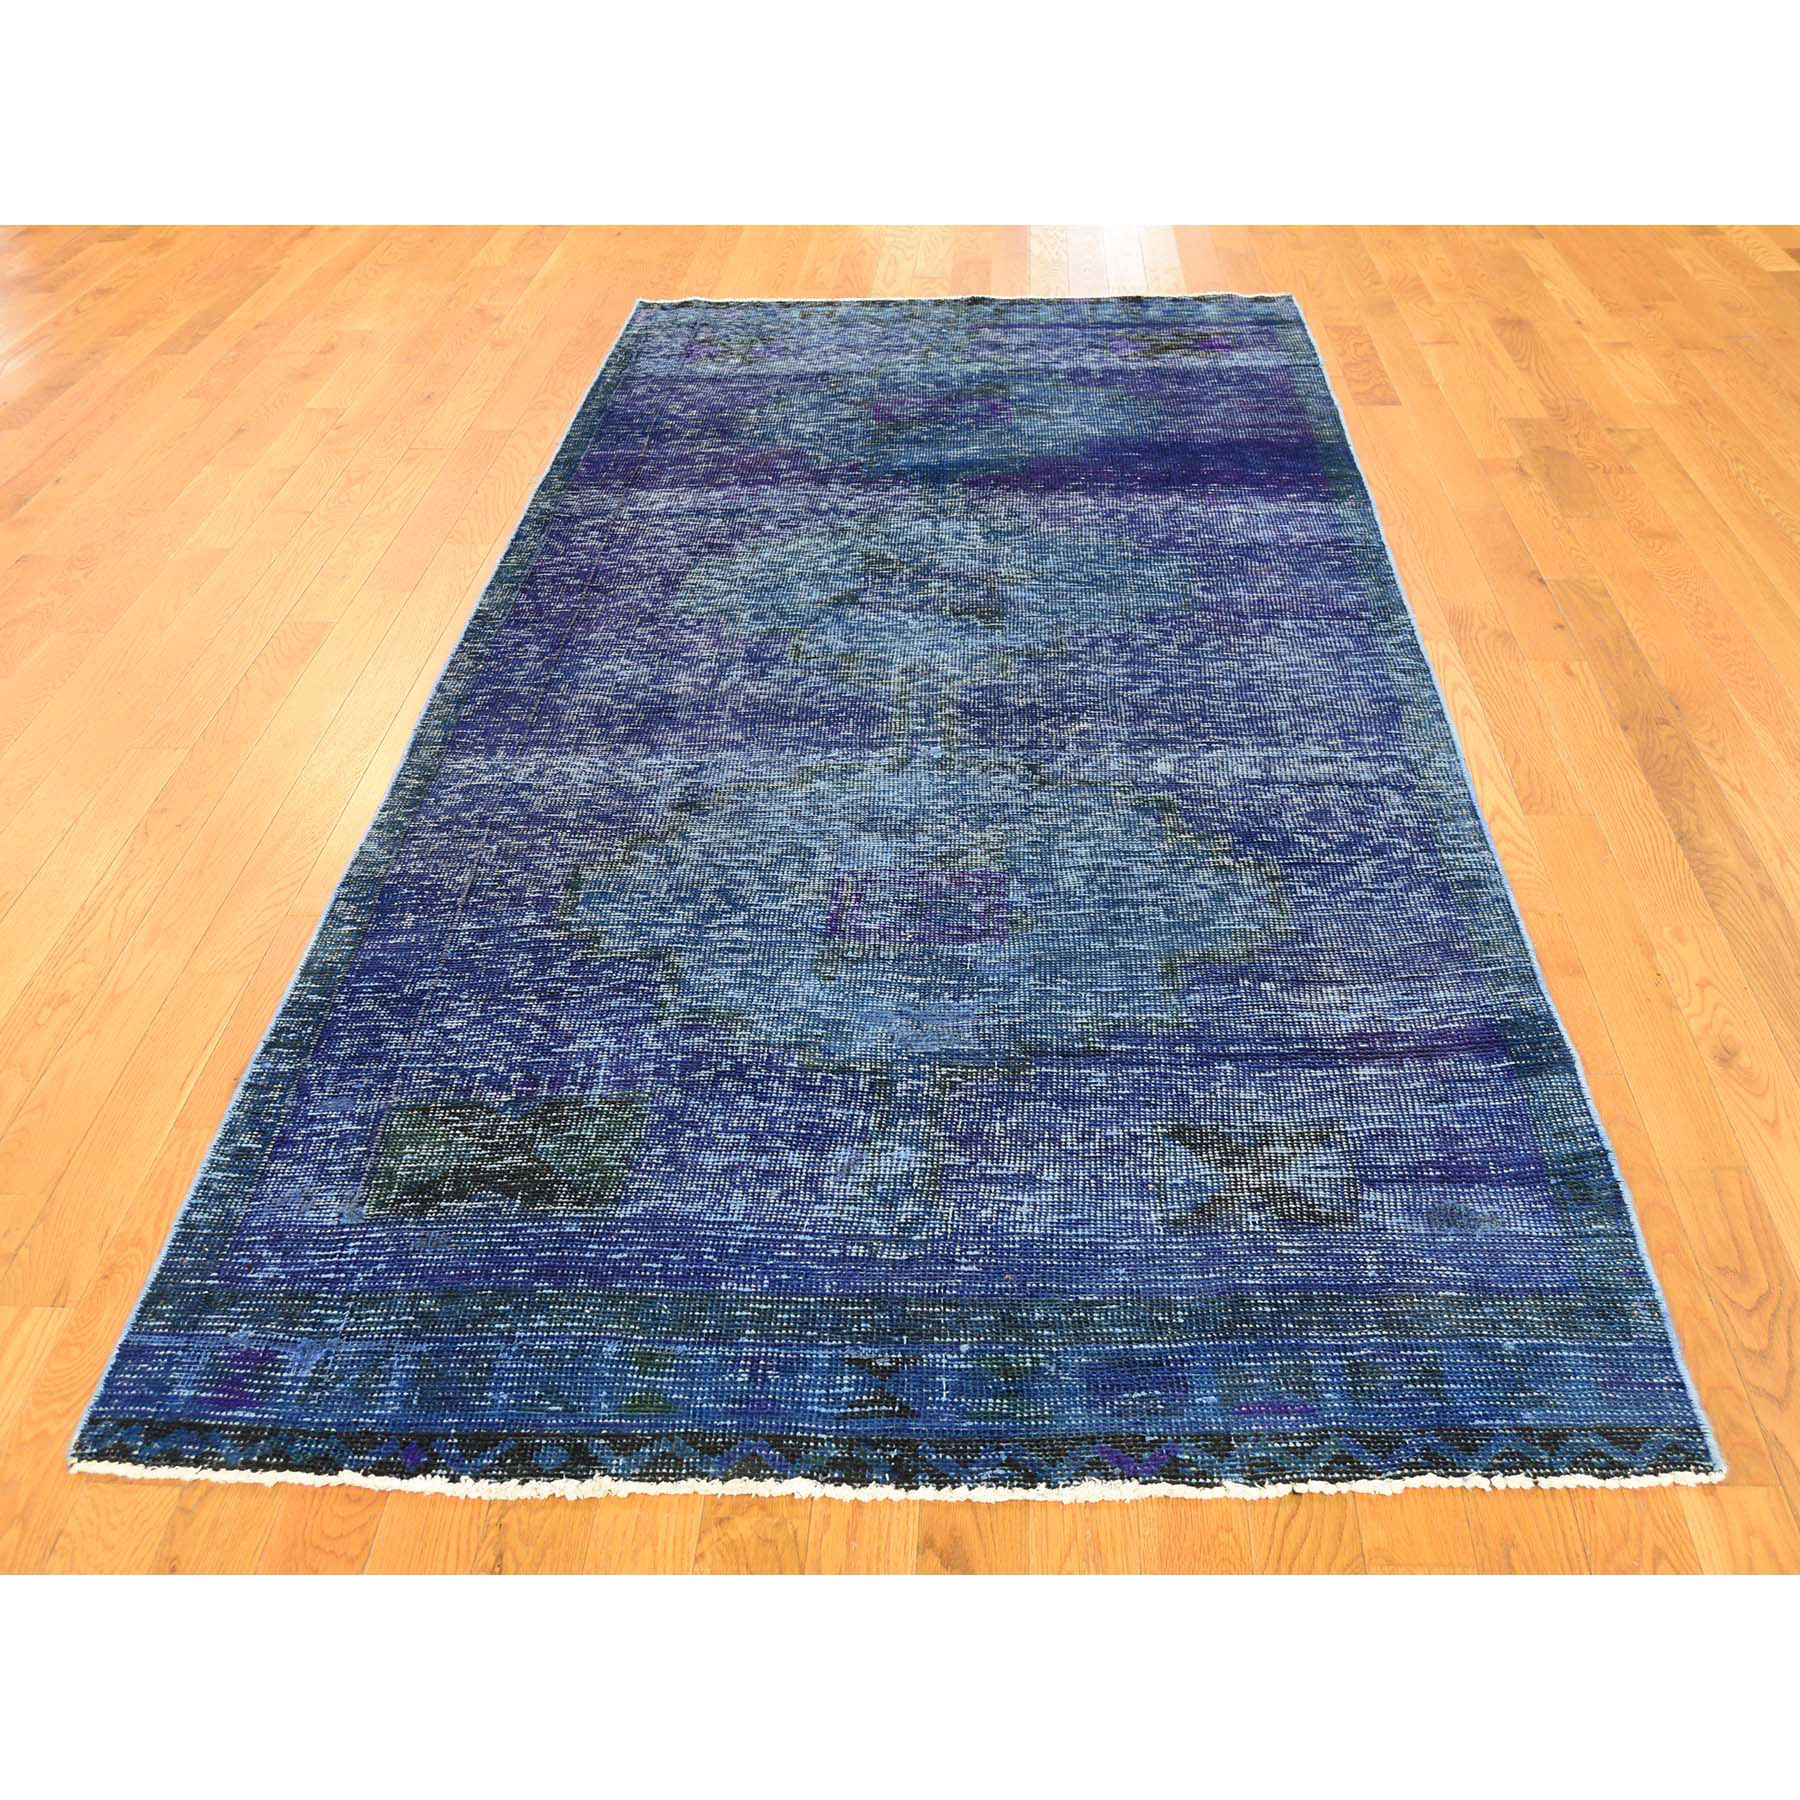 4-4--x9-4-- Overdyed Persian Tabriz Worn Hand-Knotted Wide Runner Rug 